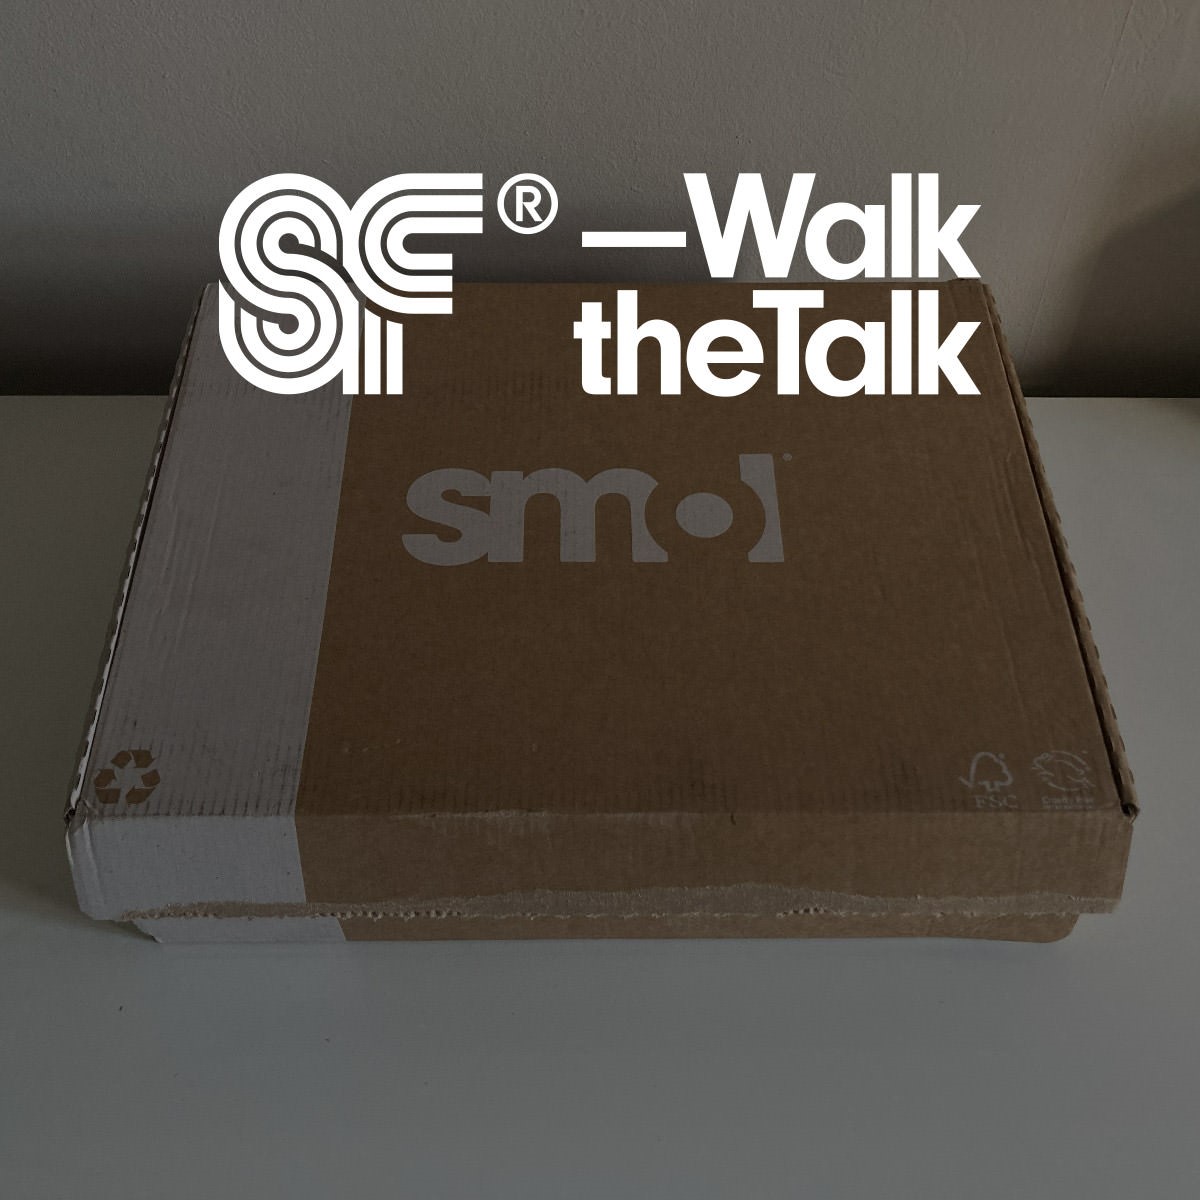 Superfried – Walk the Talk. Testing eco friendly products by smol. Considering purchases to reduce my environmental impact. 01.